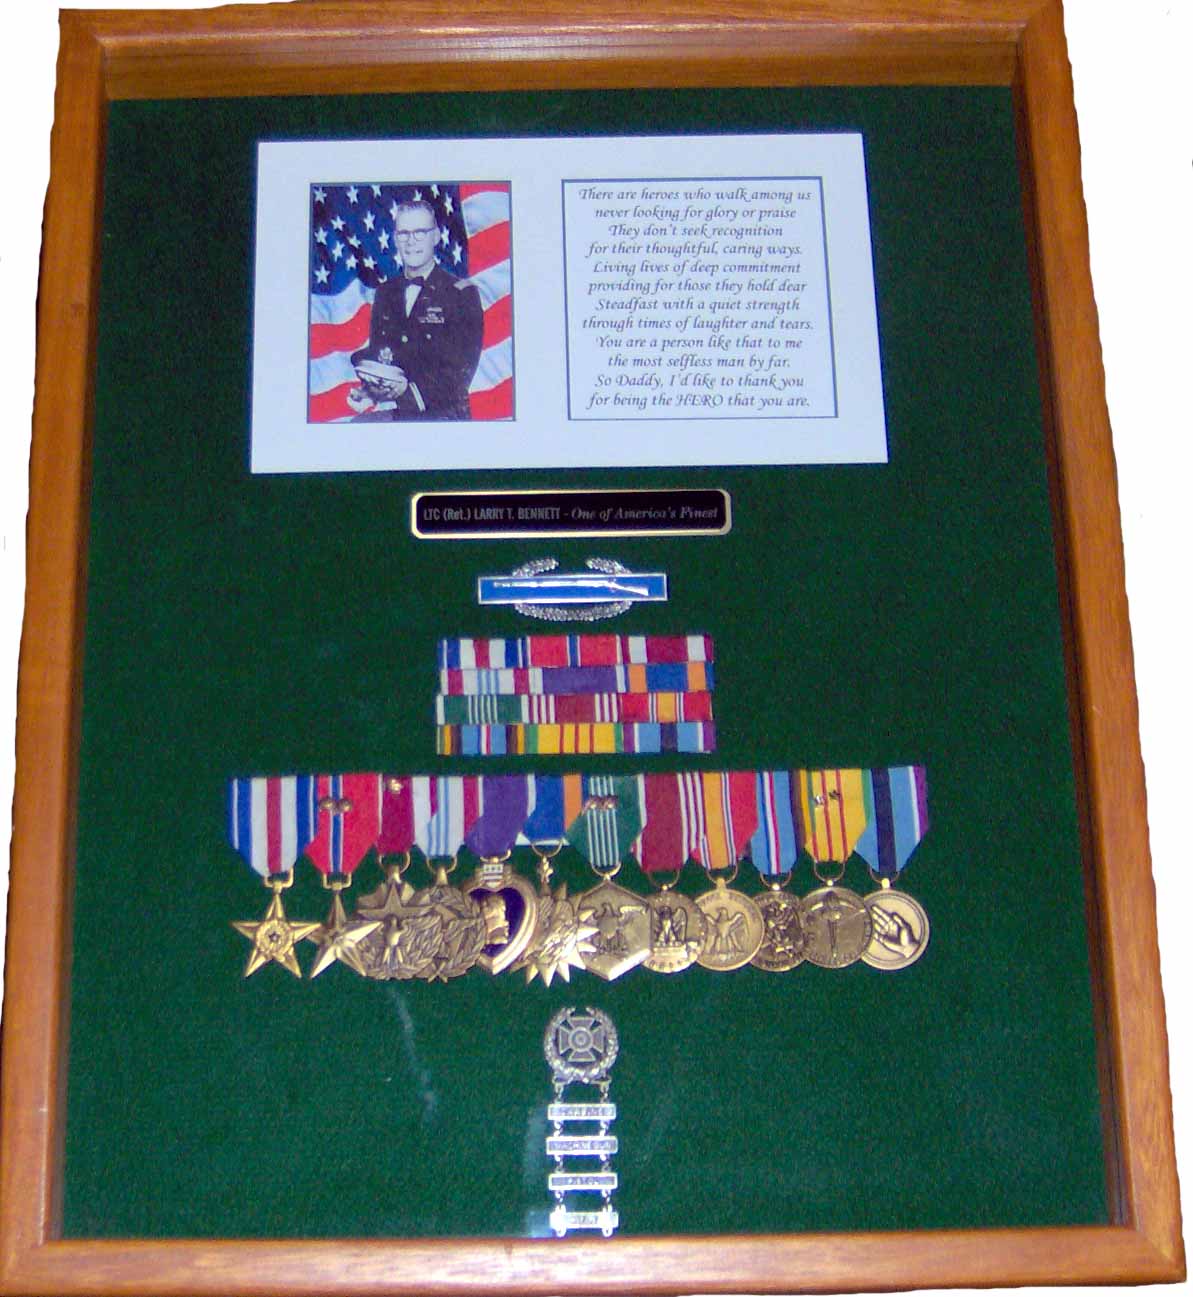 Norm's Military and Association Medal Mounting Winnipeg Manitoba